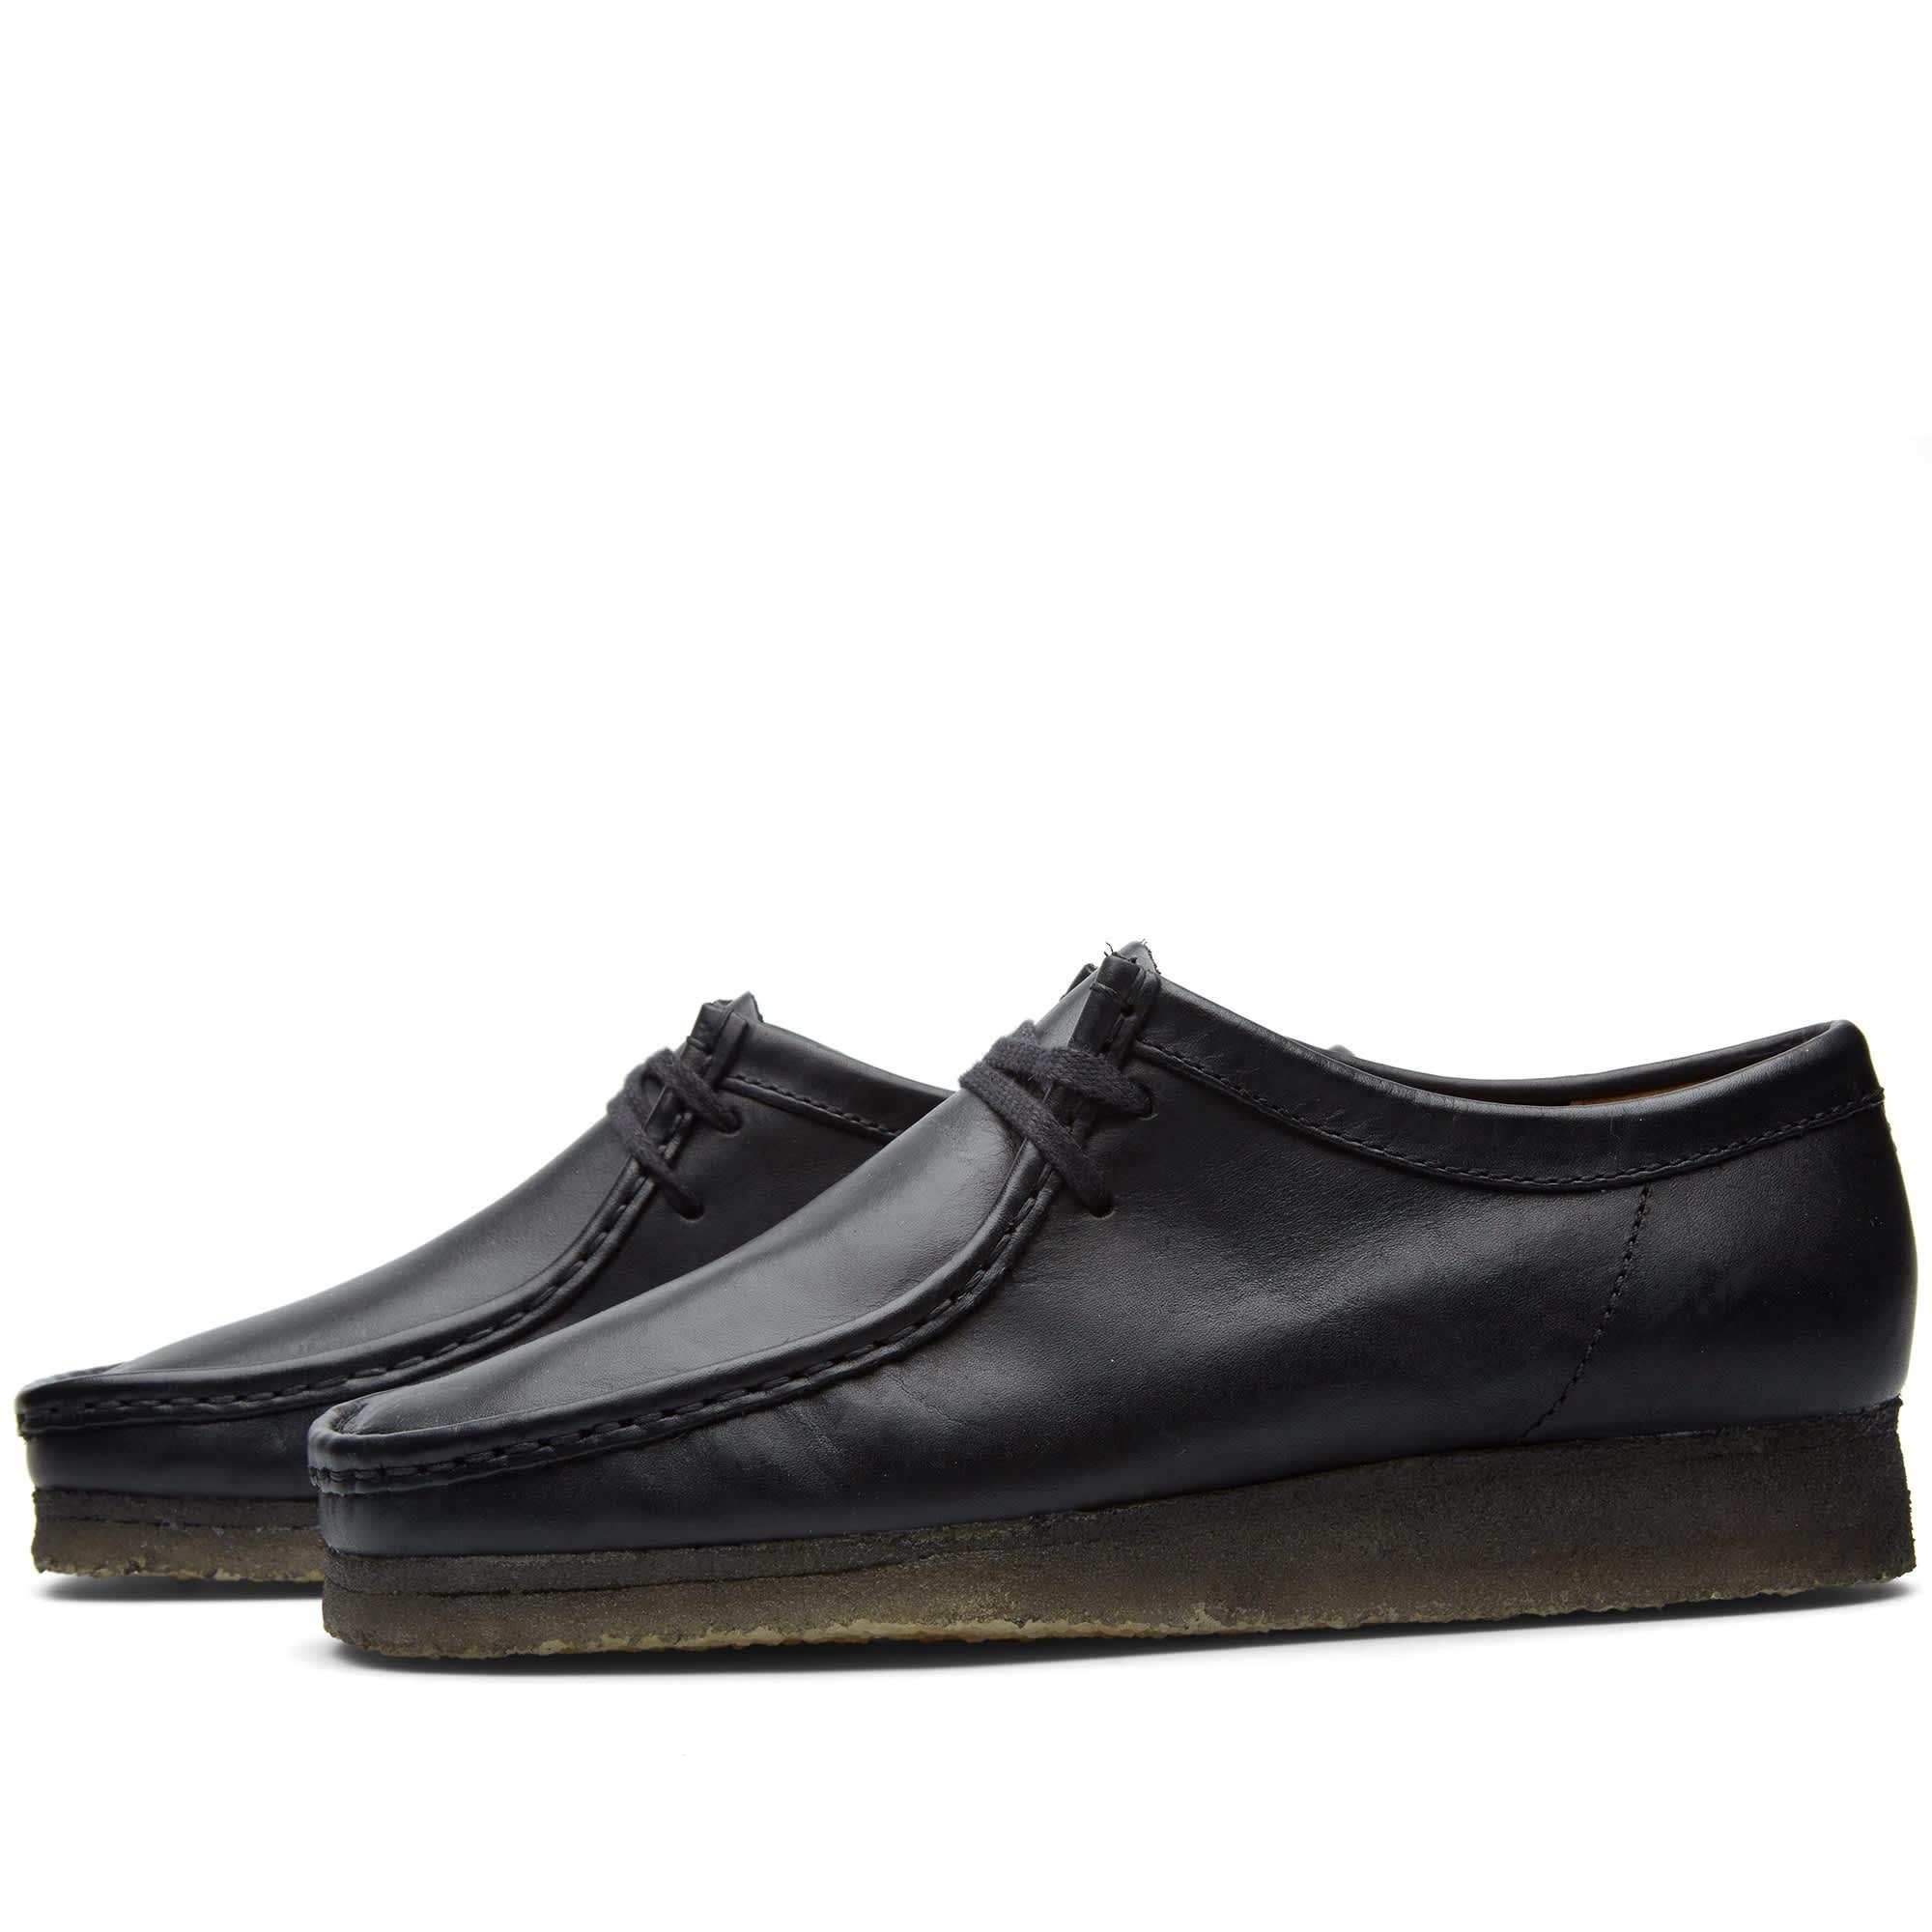 wallabee shoes black leather